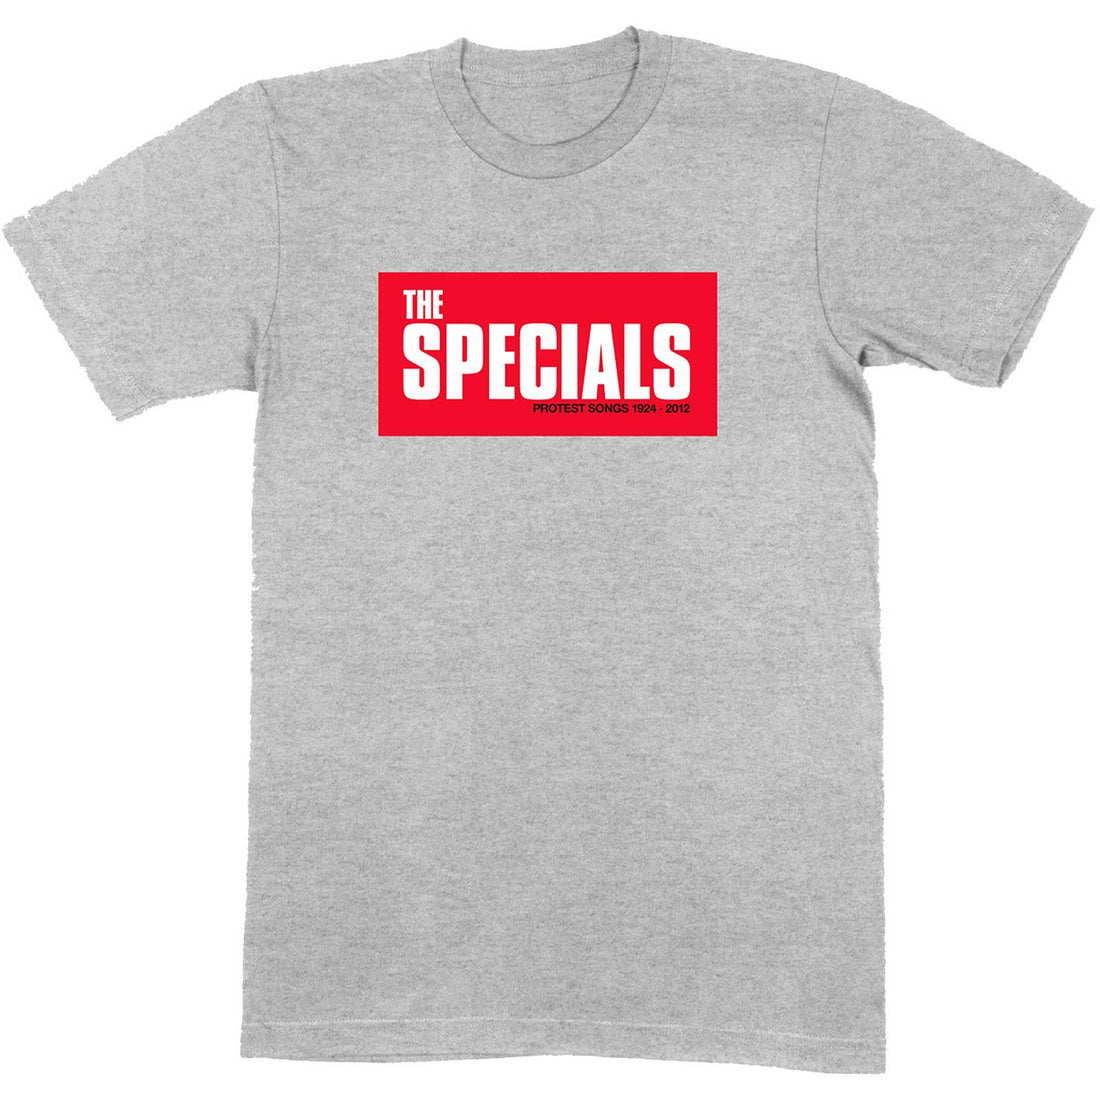 The Specials Unisex T-Shirt: Protest Songs